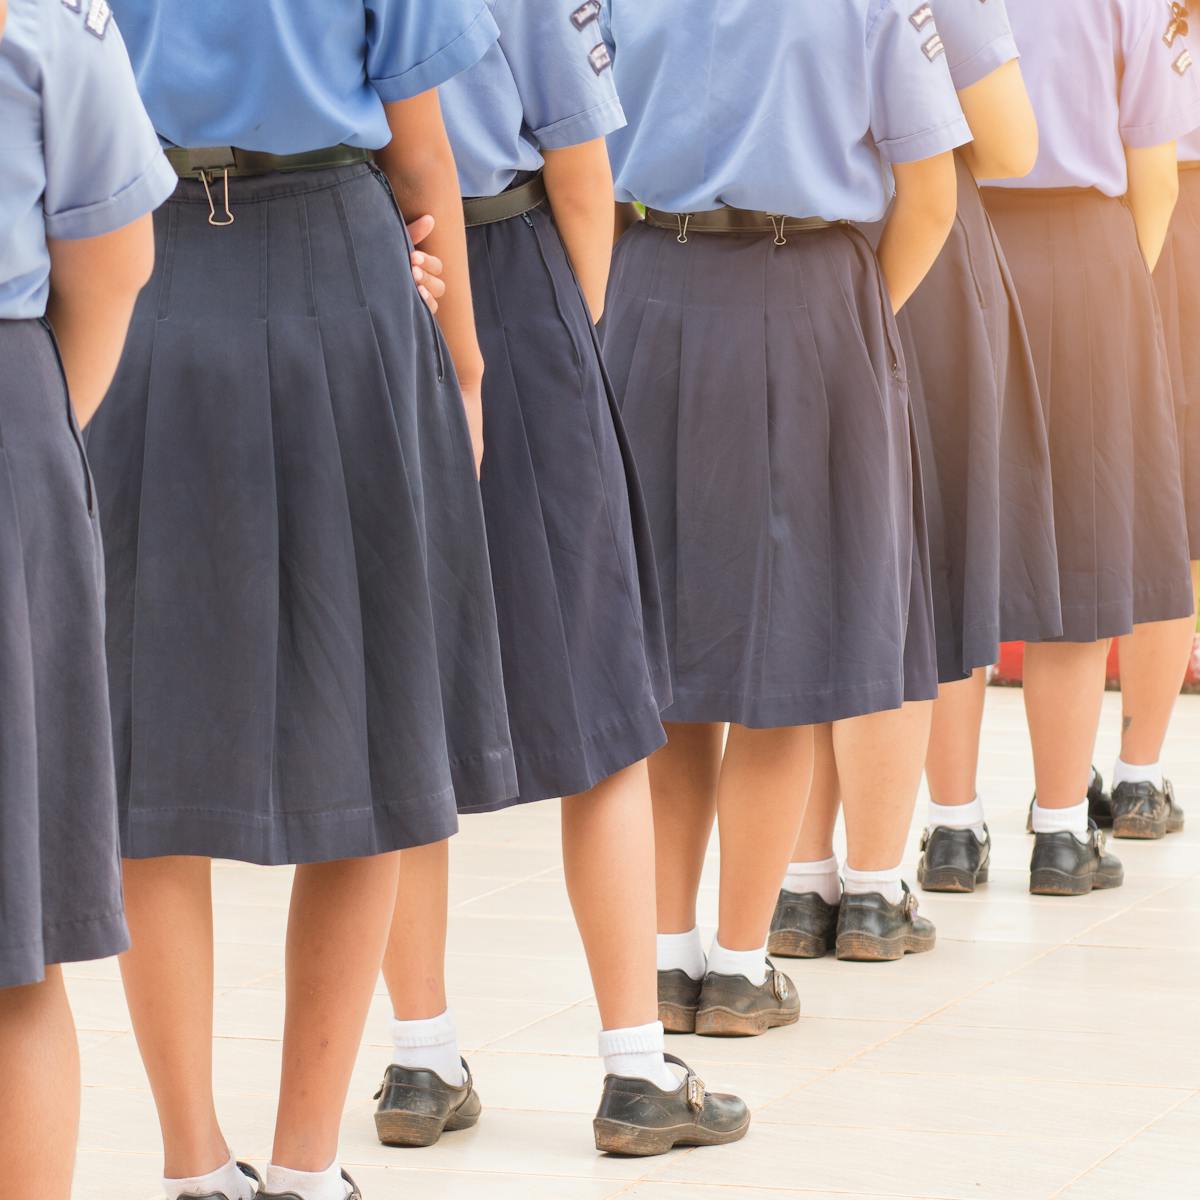 should students have to wear uniforms